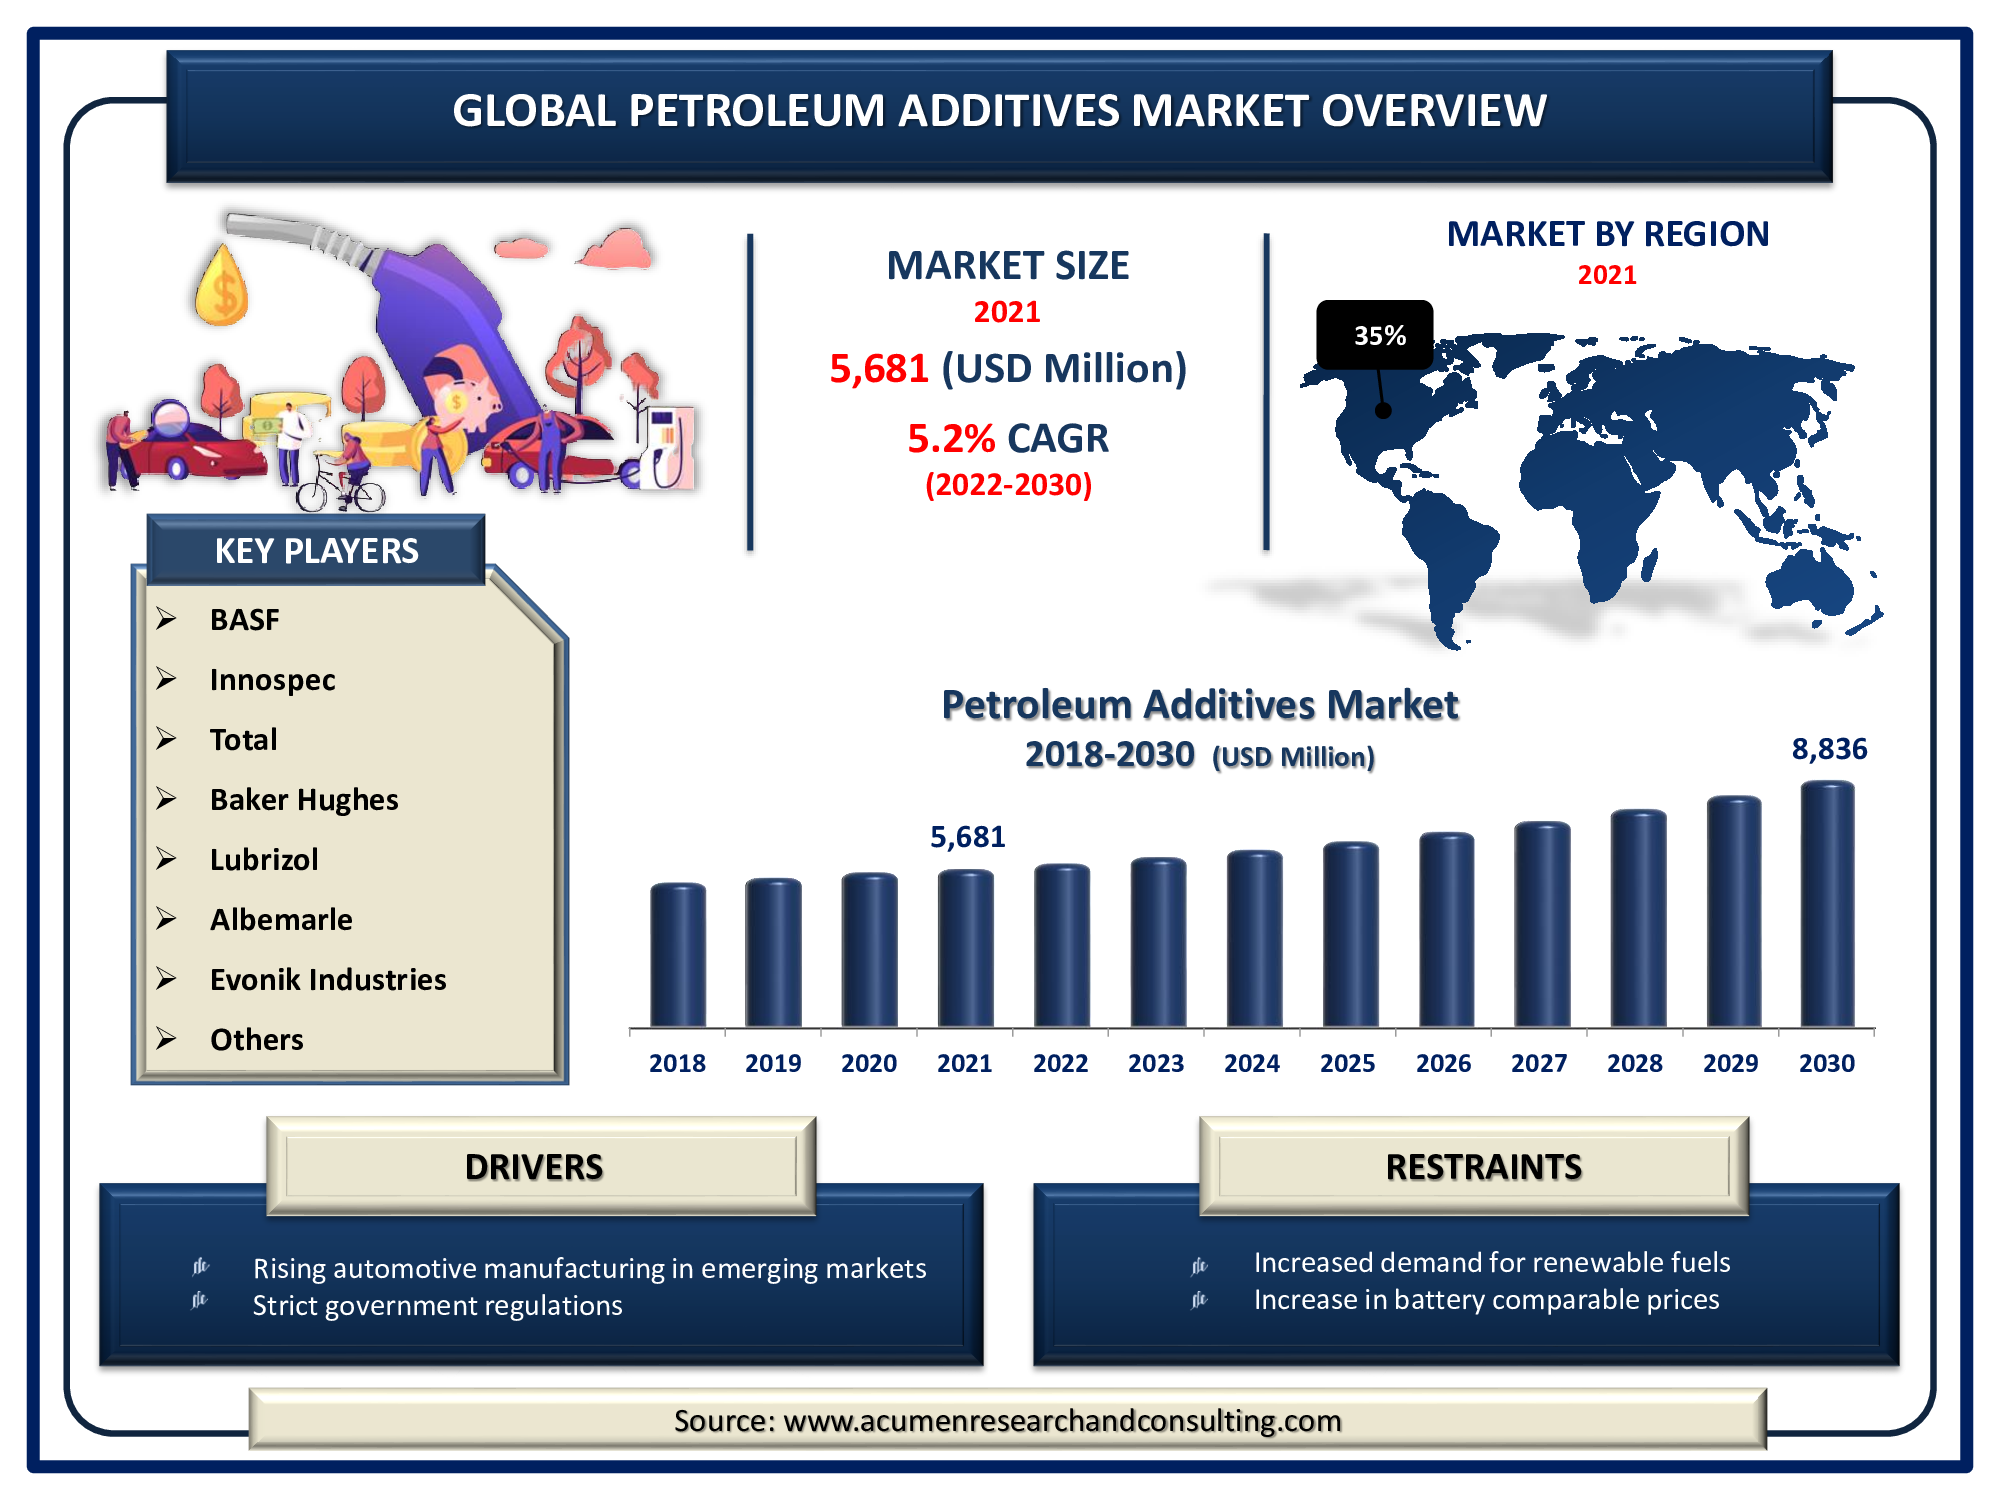 The Global Petroleum Additives Market Size was valued at USD 5,681 Million in 2021 and is predicted to be worth USD 8,836 Million by 2030, with a CAGR of 5.2% from 2022 to 2030.